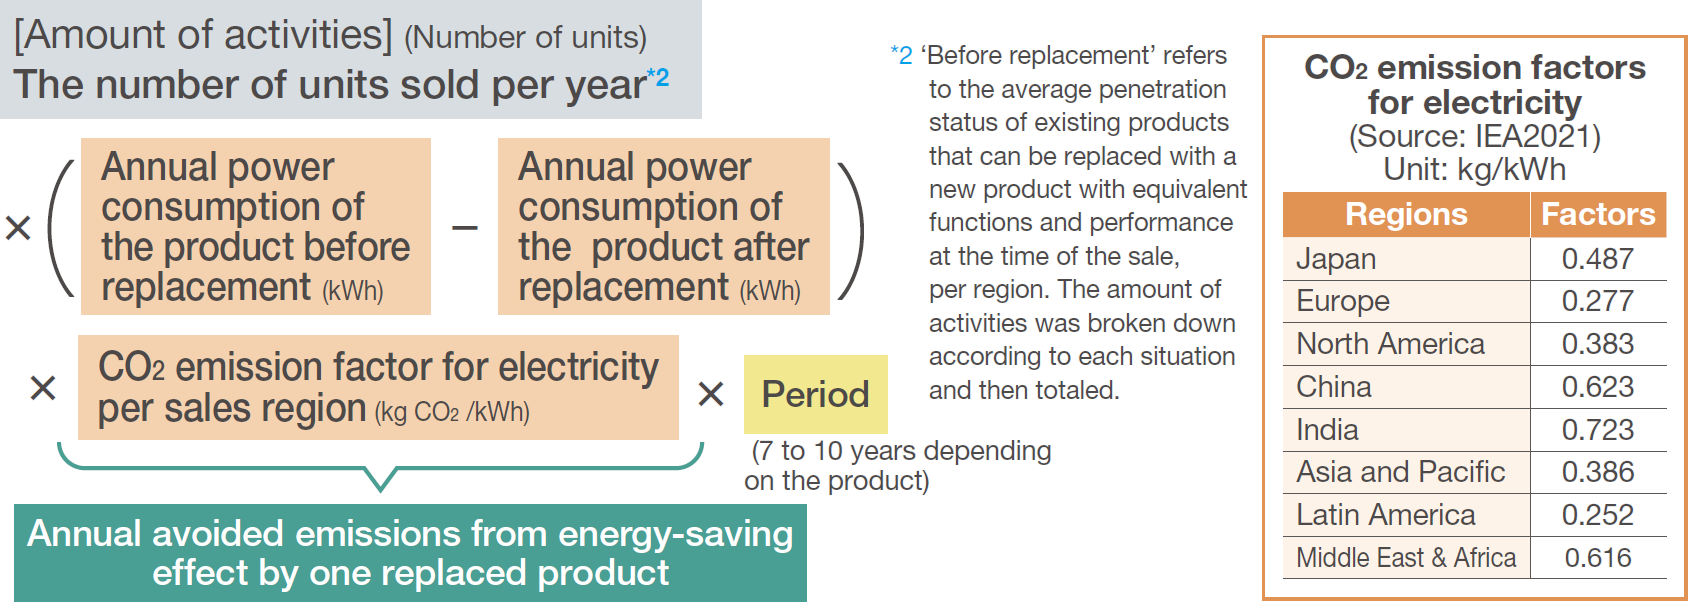 [Amount of activities] (Number of units) The number of units sold per year*2 * (Annual power Unit: kg/kWh consumption of the product before replacement (kWh) - Annual power consumption of the product after replacement (kWh))*CO2 emission factor for electricity per sales region (kg CO2 /kWh) * Period(7 to 10 years depending on the product) Annual avoided emissions from energy-saving effect by one replaced product *2 'Before replacement' refers to the average penetration status of existing products that can be replaced with a new product with equivalent functions and performance at the time of the sale, per region. The amount of activities was broken down according to each situation and then totaled. CO2 emission factors for electricity (Source: IEA2021)Unit: kg/kWh Regions:Factors,  Japan:0.487, Europe:0.277, North America:0.383, China:0.623, India:0.723, Asia and Pacific:0.386, Latin America:0.252, Middle East & Africa:0.616